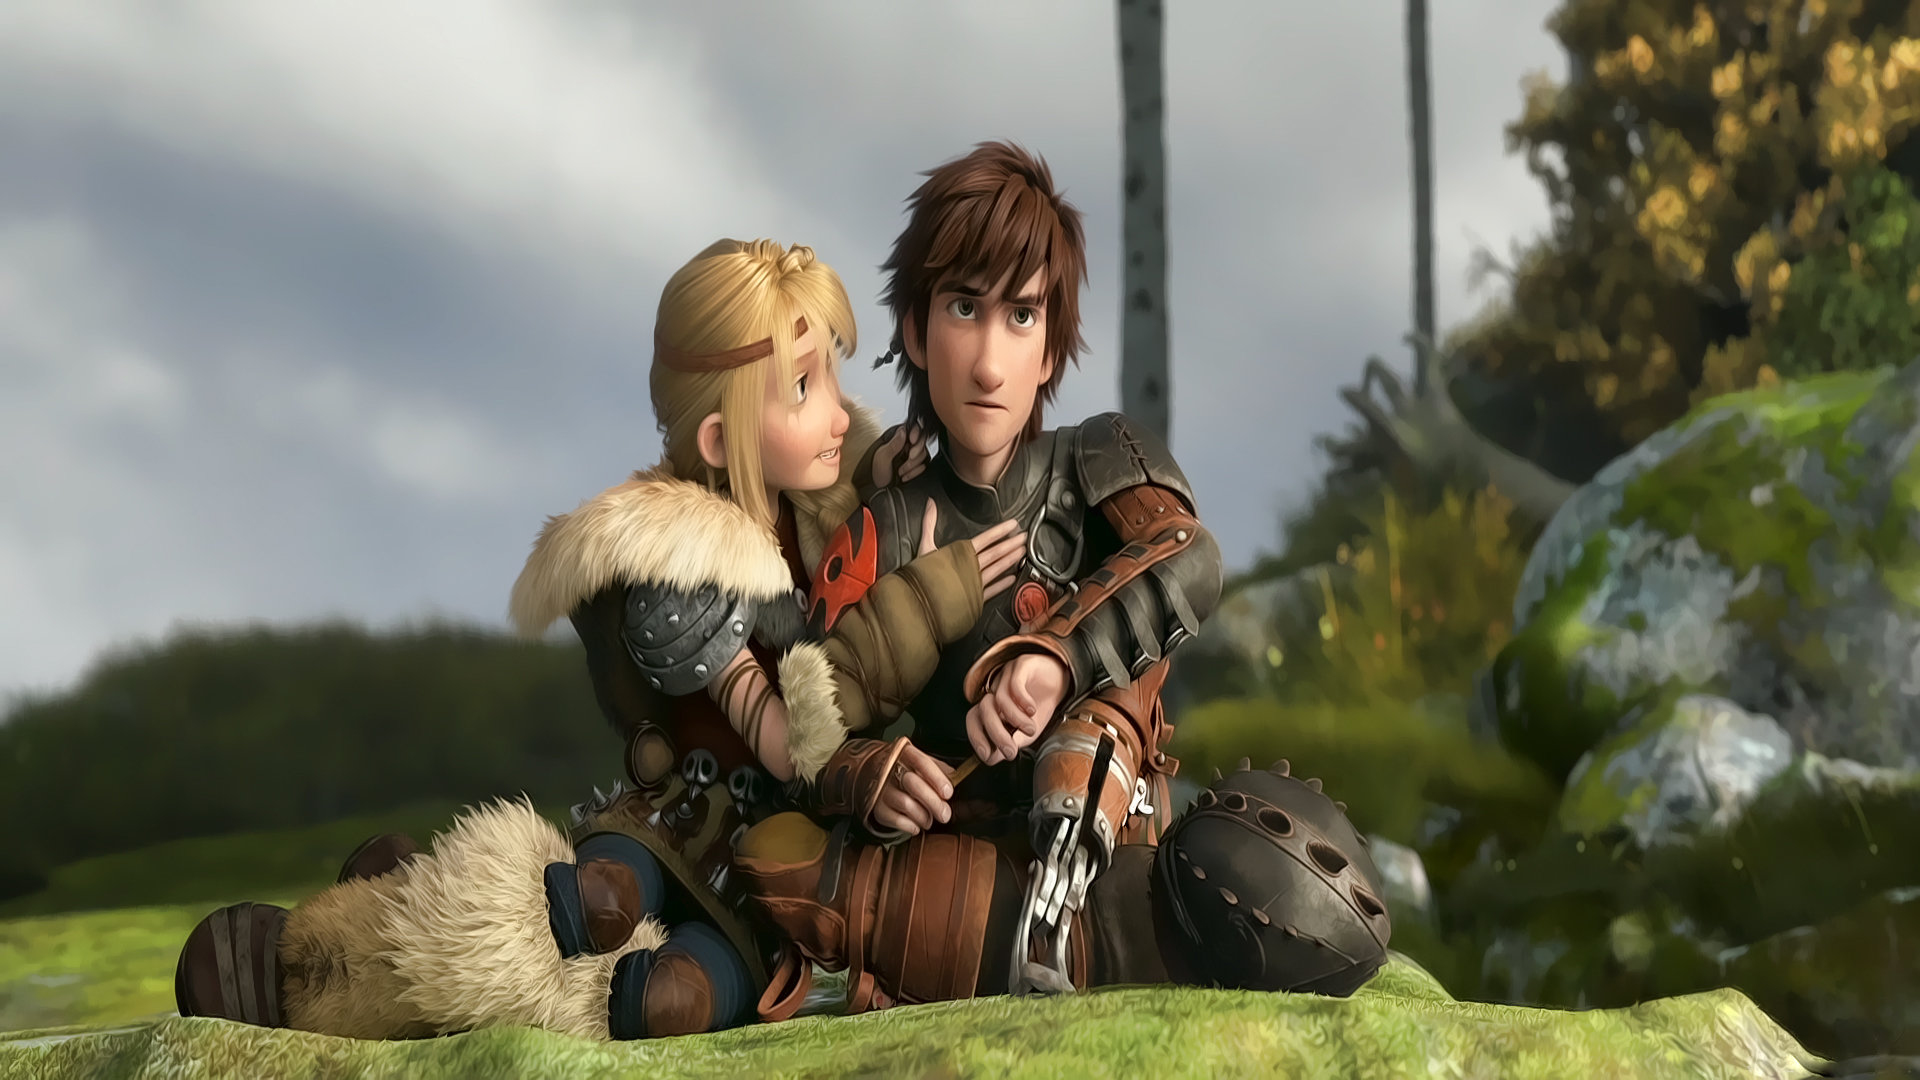 Awesome How To Train Your Dragon 2 free background ID:90200 for hd 1080p computer